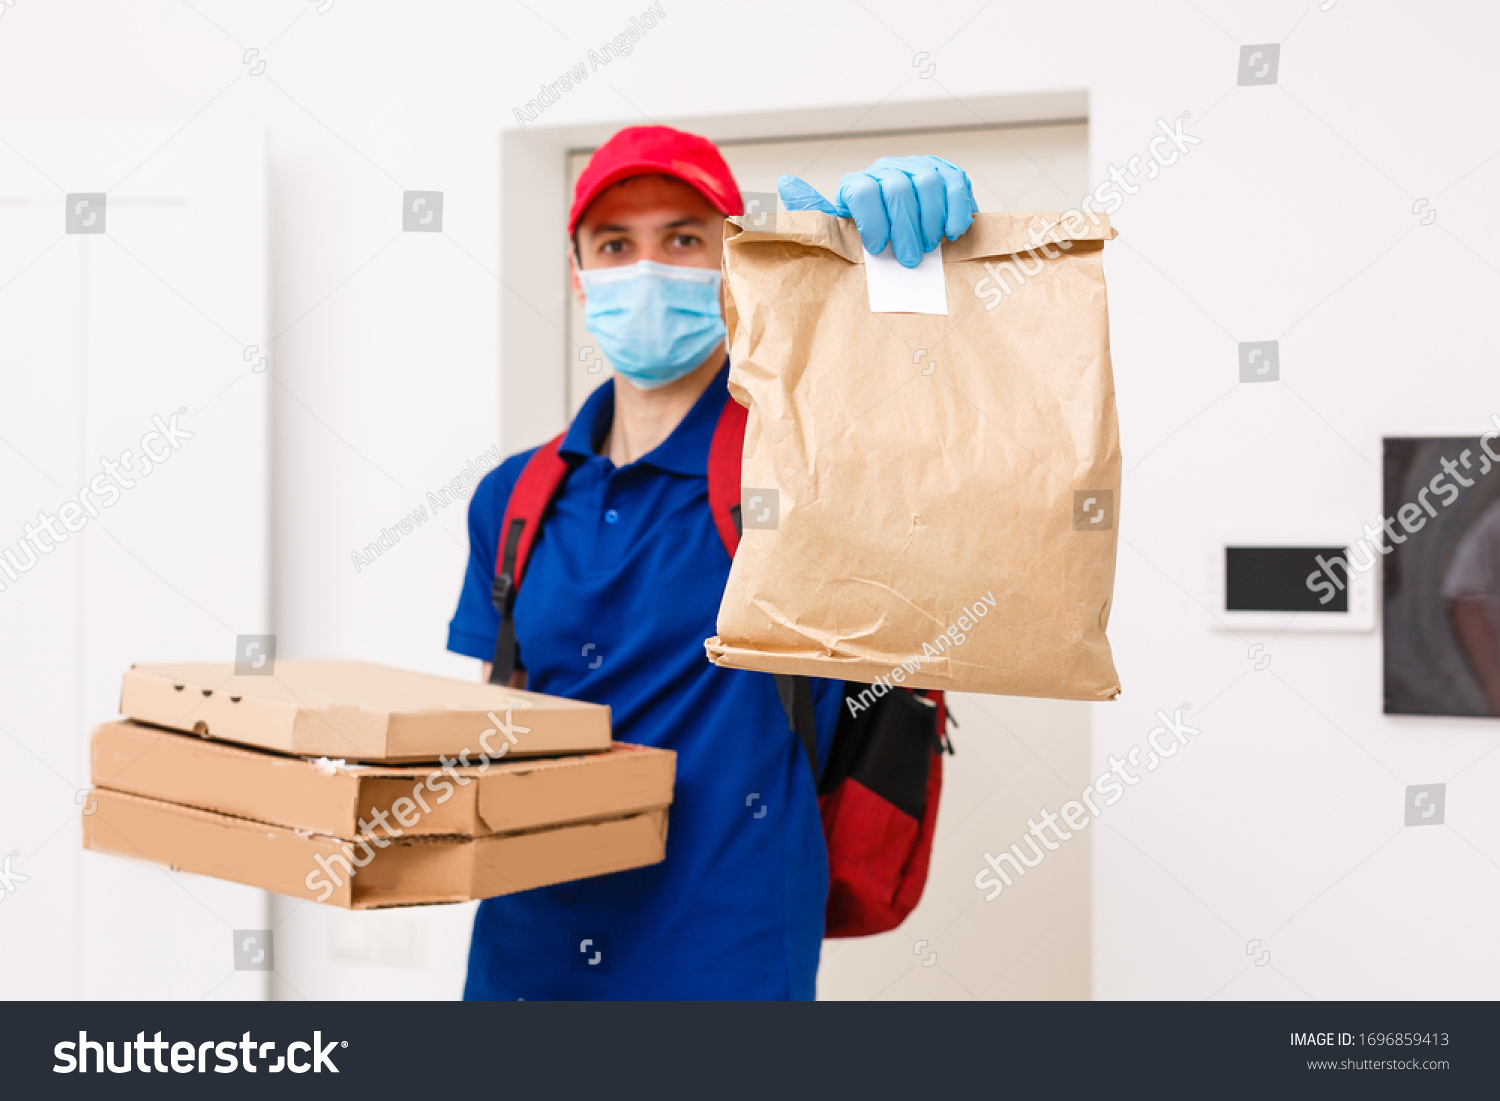 Delivery man employee in red cap t-shirt uniform mask gloves give food order pizza boxes isolated on yellow background studio. Service quarantine pandemic coronavirus virus flu 2019-ncov concept #1696859413